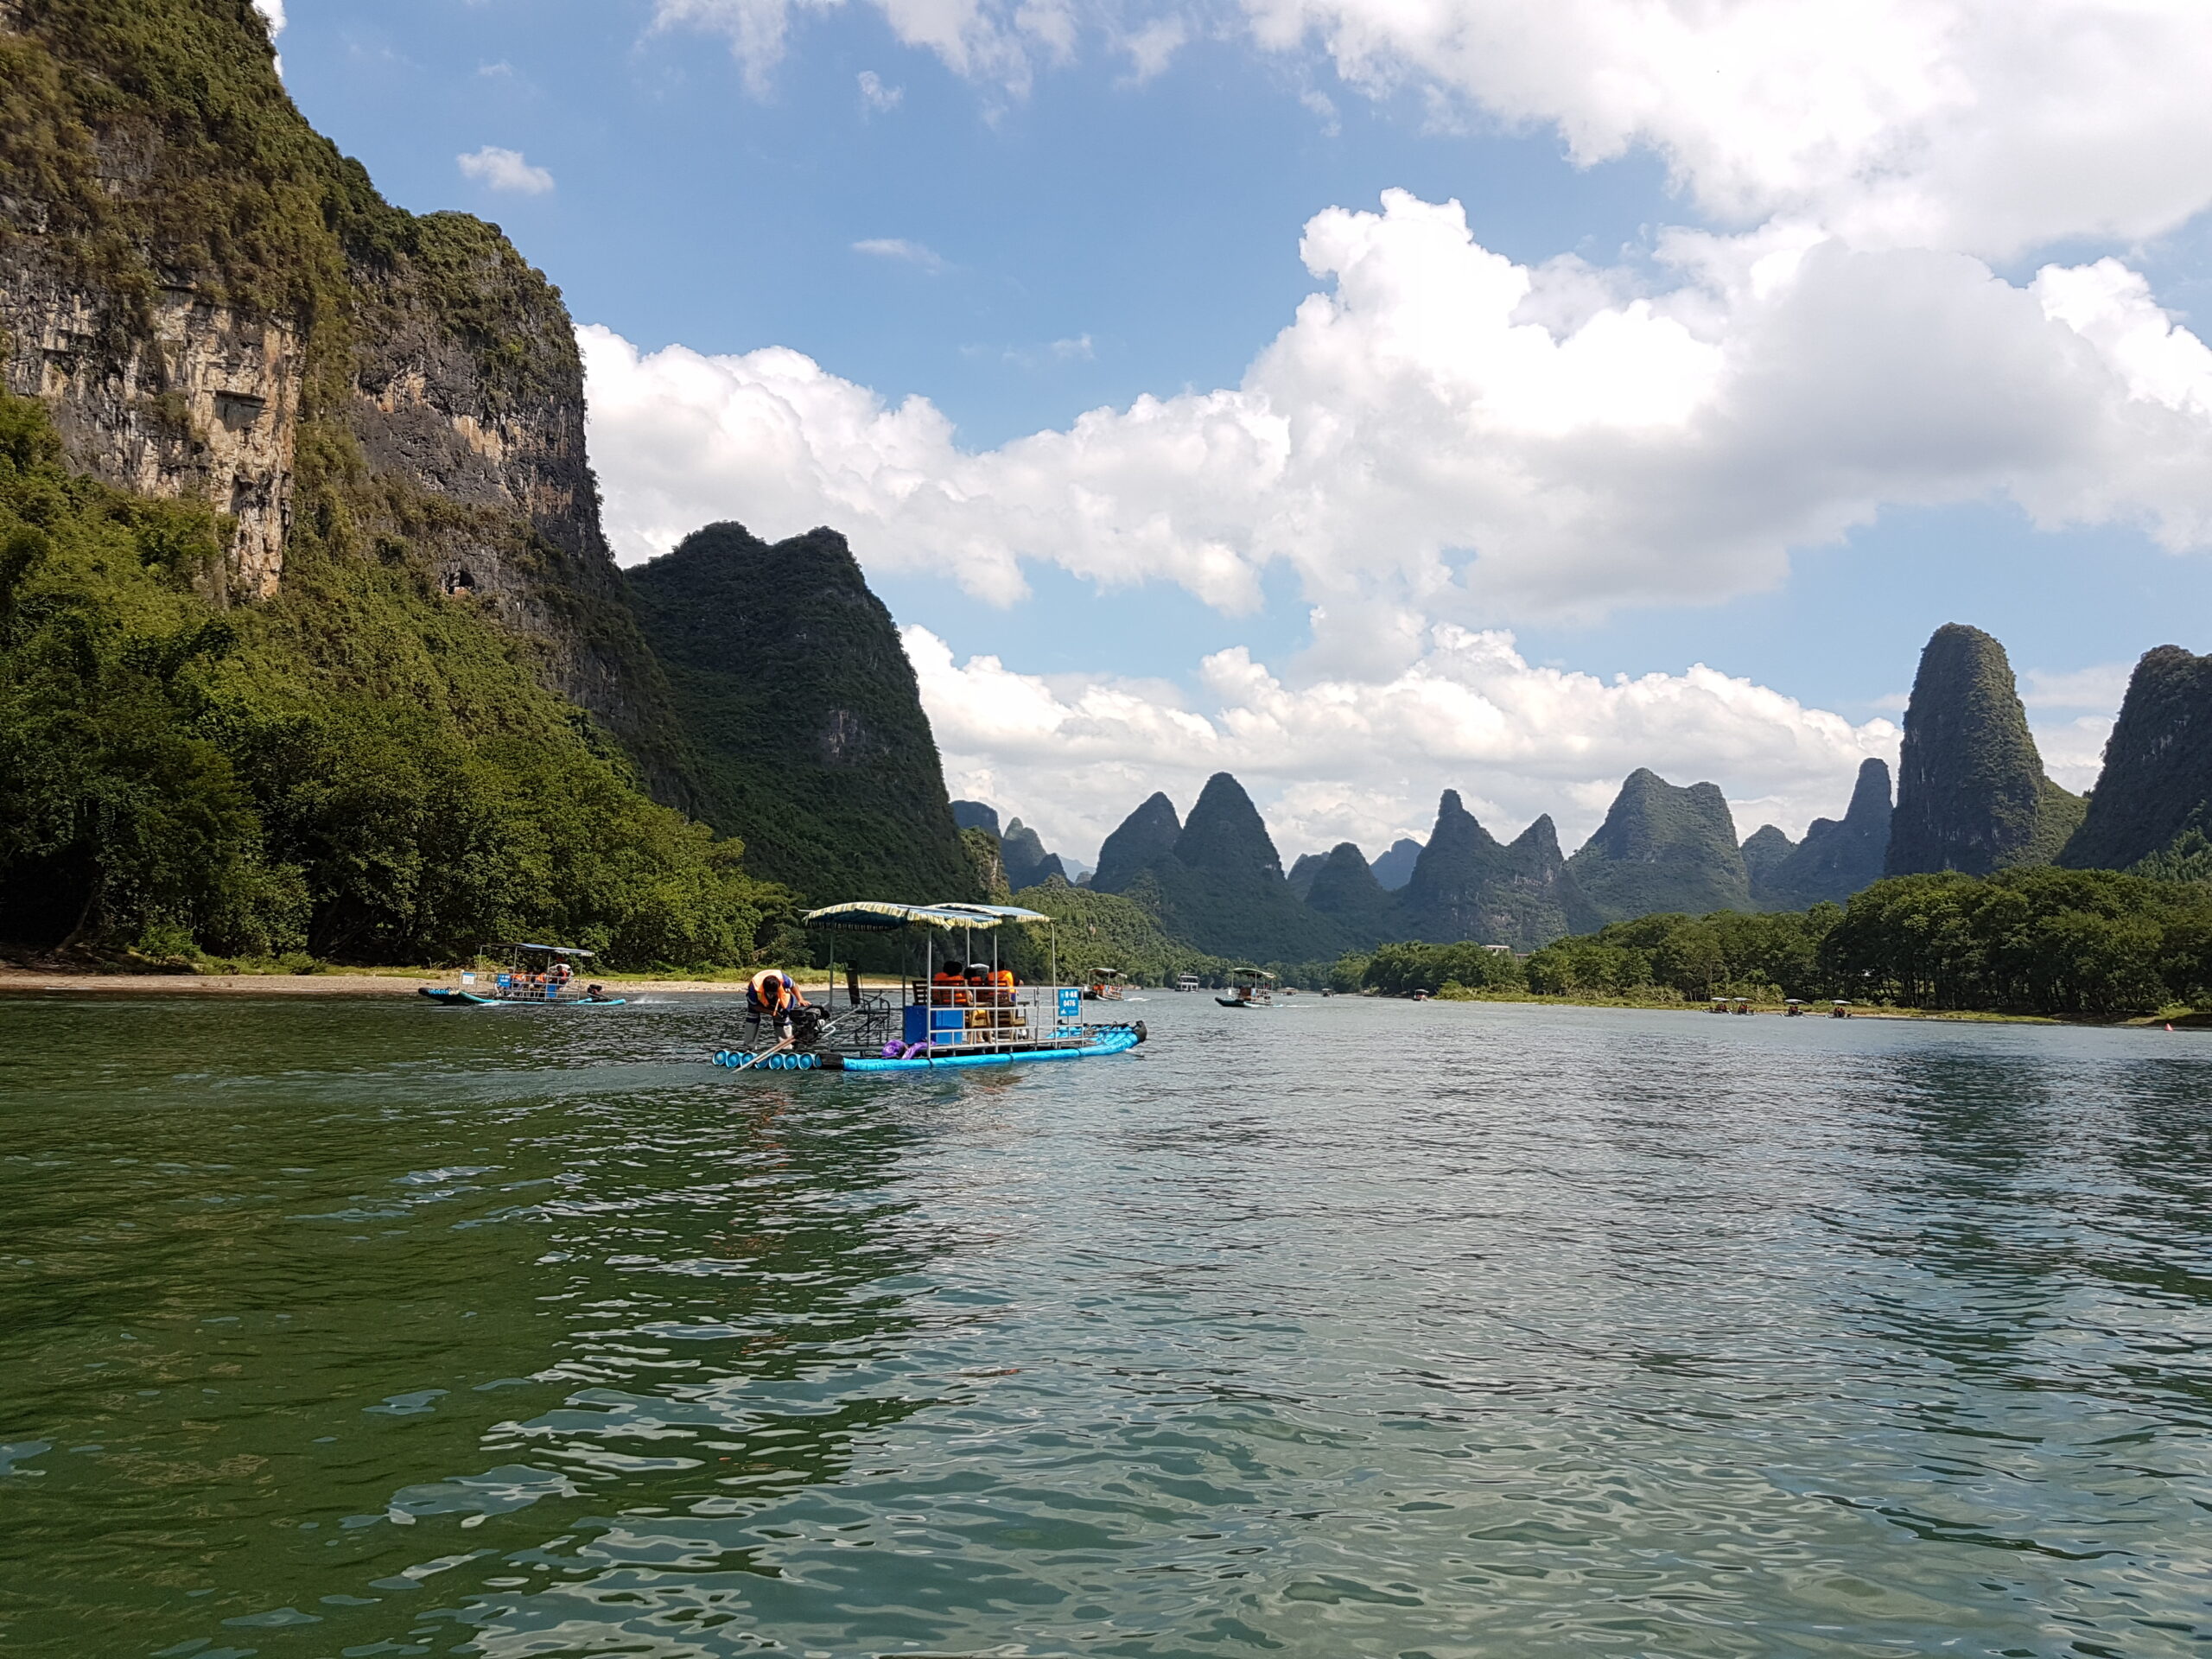 The karst mountains of Guilin region